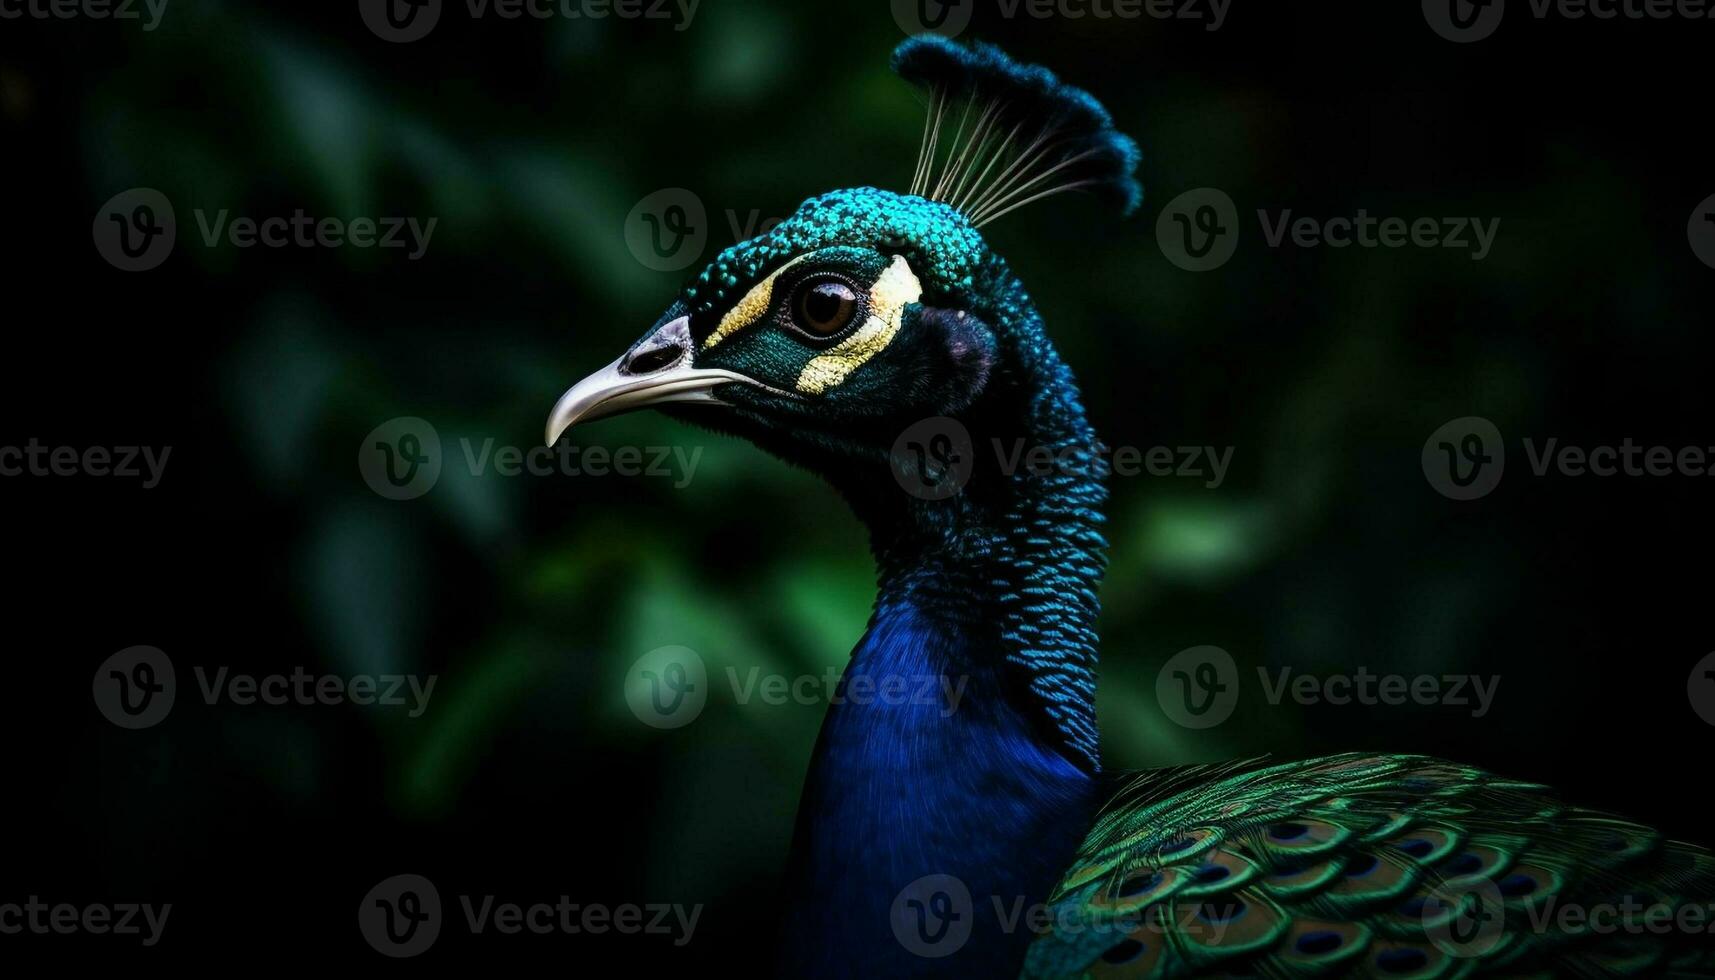 A majestic peacock displays vibrant colors in nature elegant portrait generated by AI photo